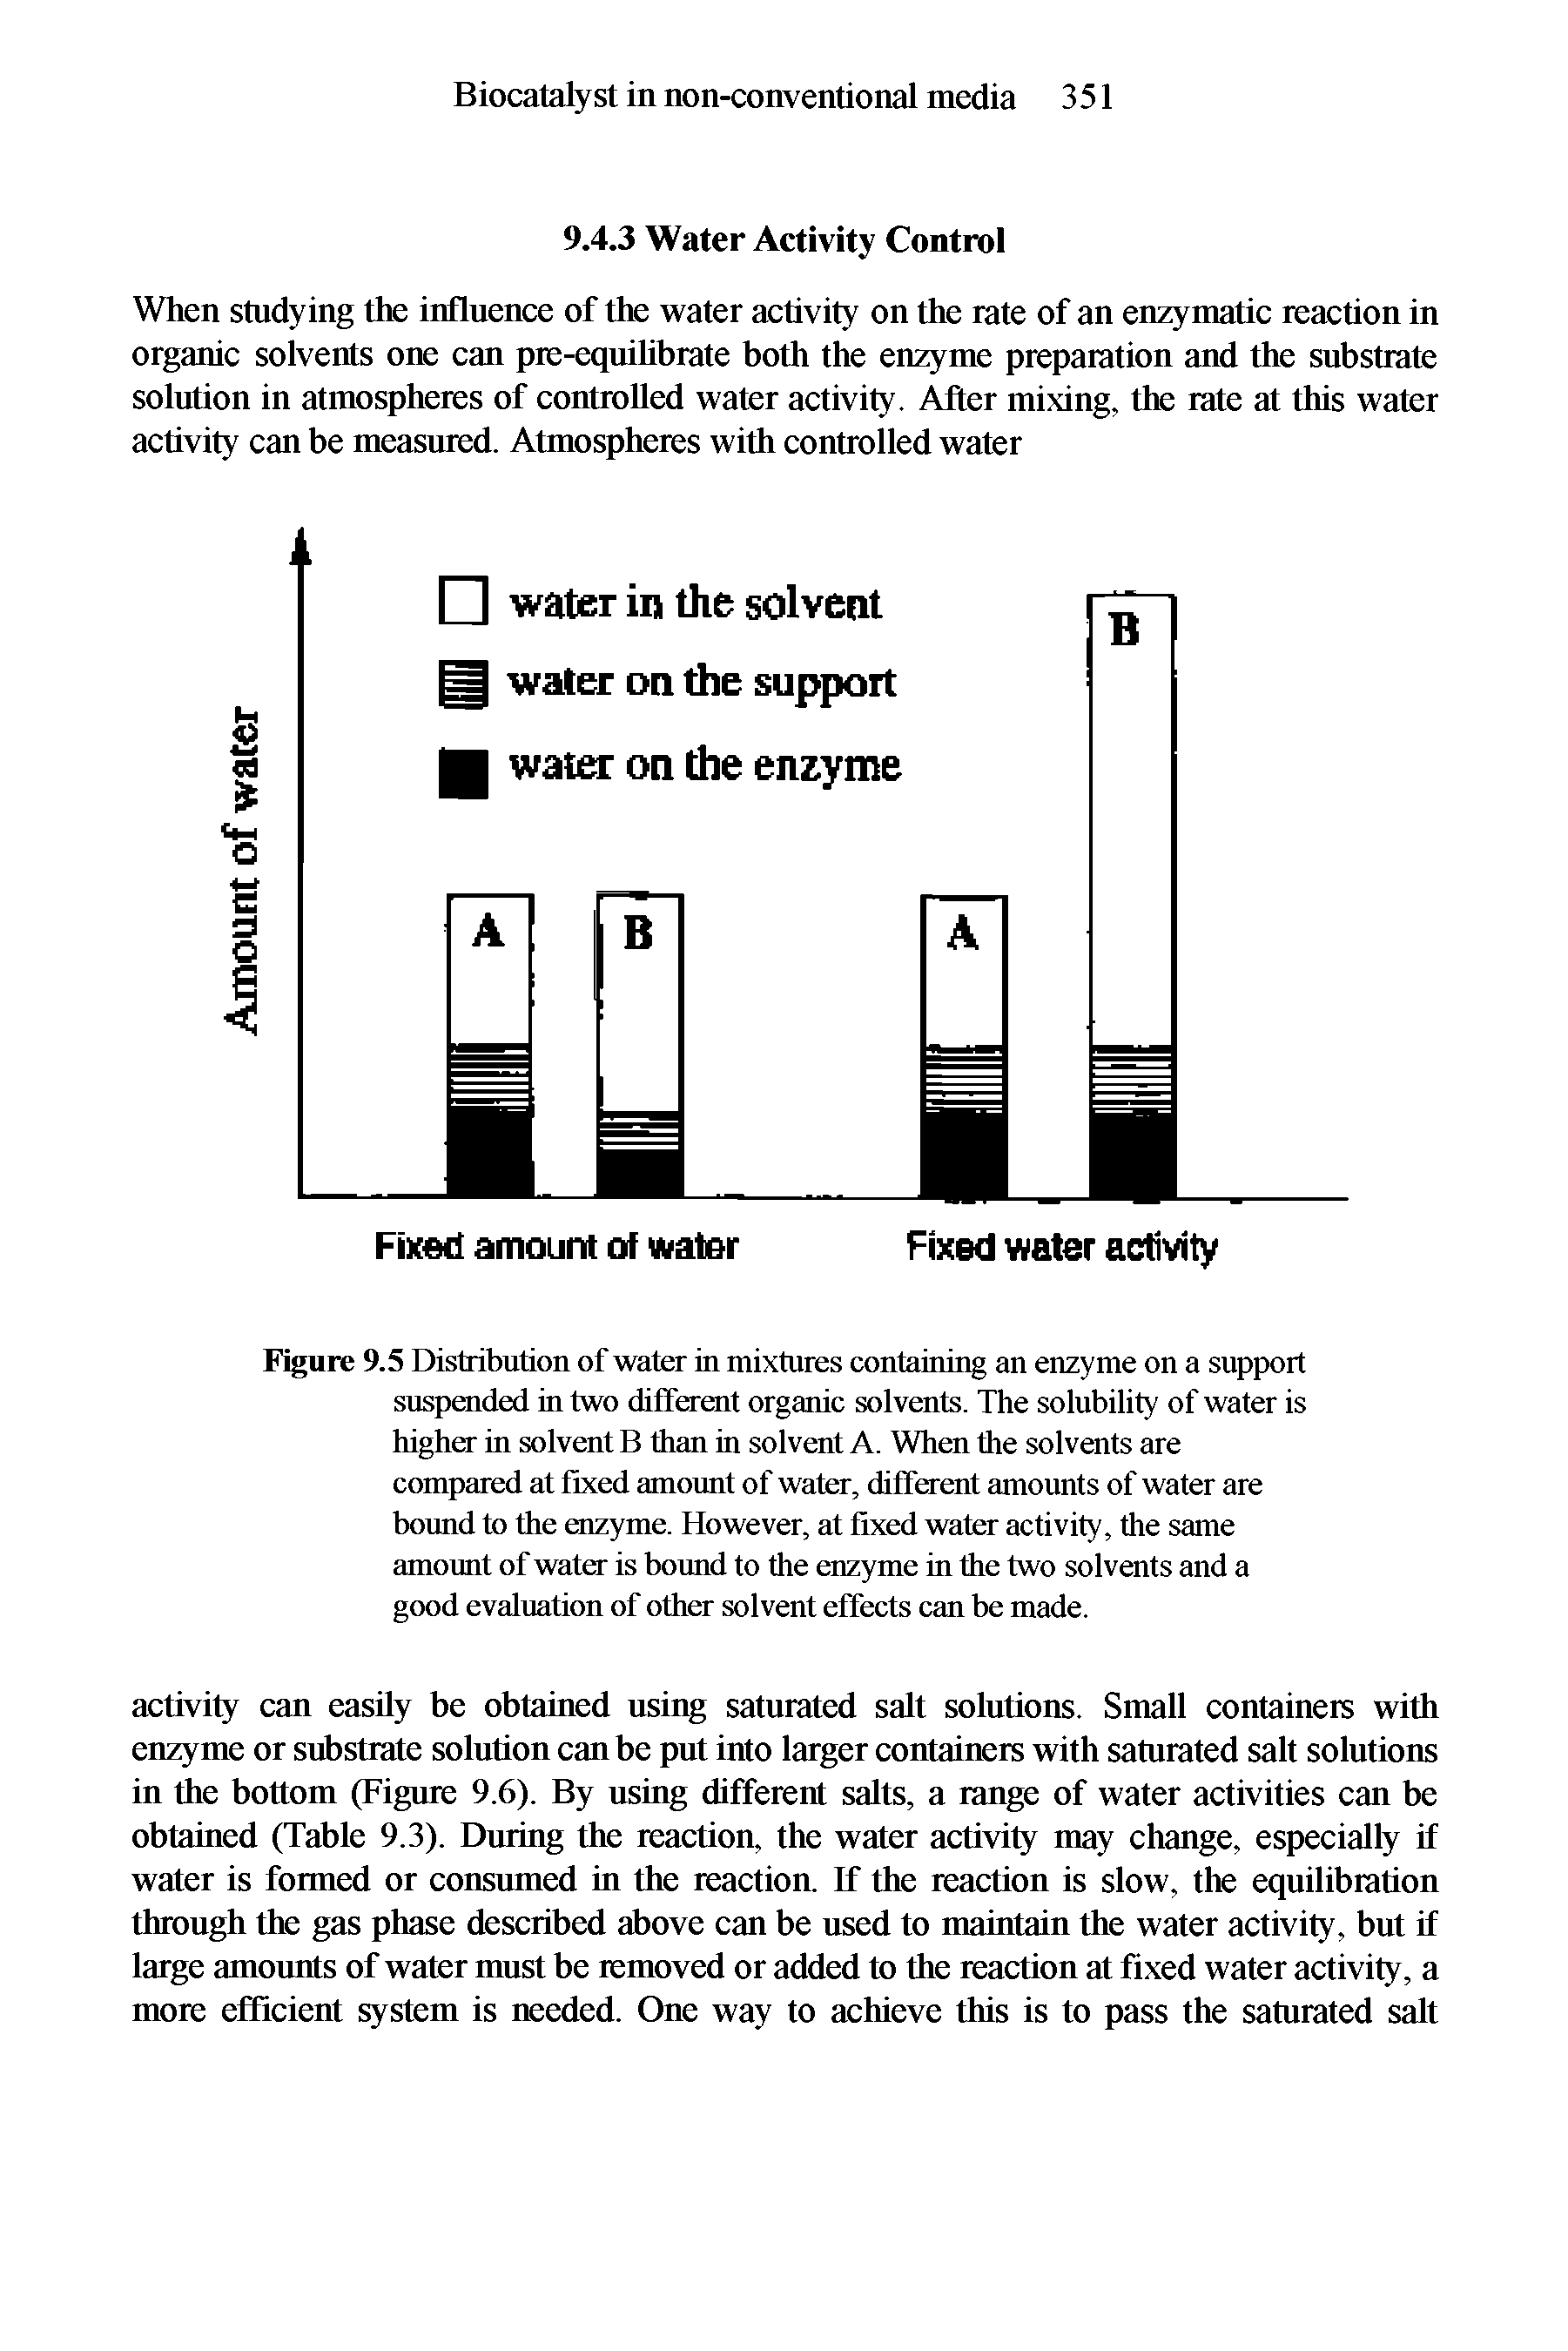 Figure 9.5 Distribution of water in mixtures containing an enzyme on a support suspended in two different organic solvents. The solubility of water is higher in solvent B than in solvent A. When the solvents are compared at fixed amount of water, different amounts of water are bound to the enzyme. However, at fixed water activity, the same amount of water is bound to the enzyme in the two solvents and a good evaluation of other solvent effects can be made.